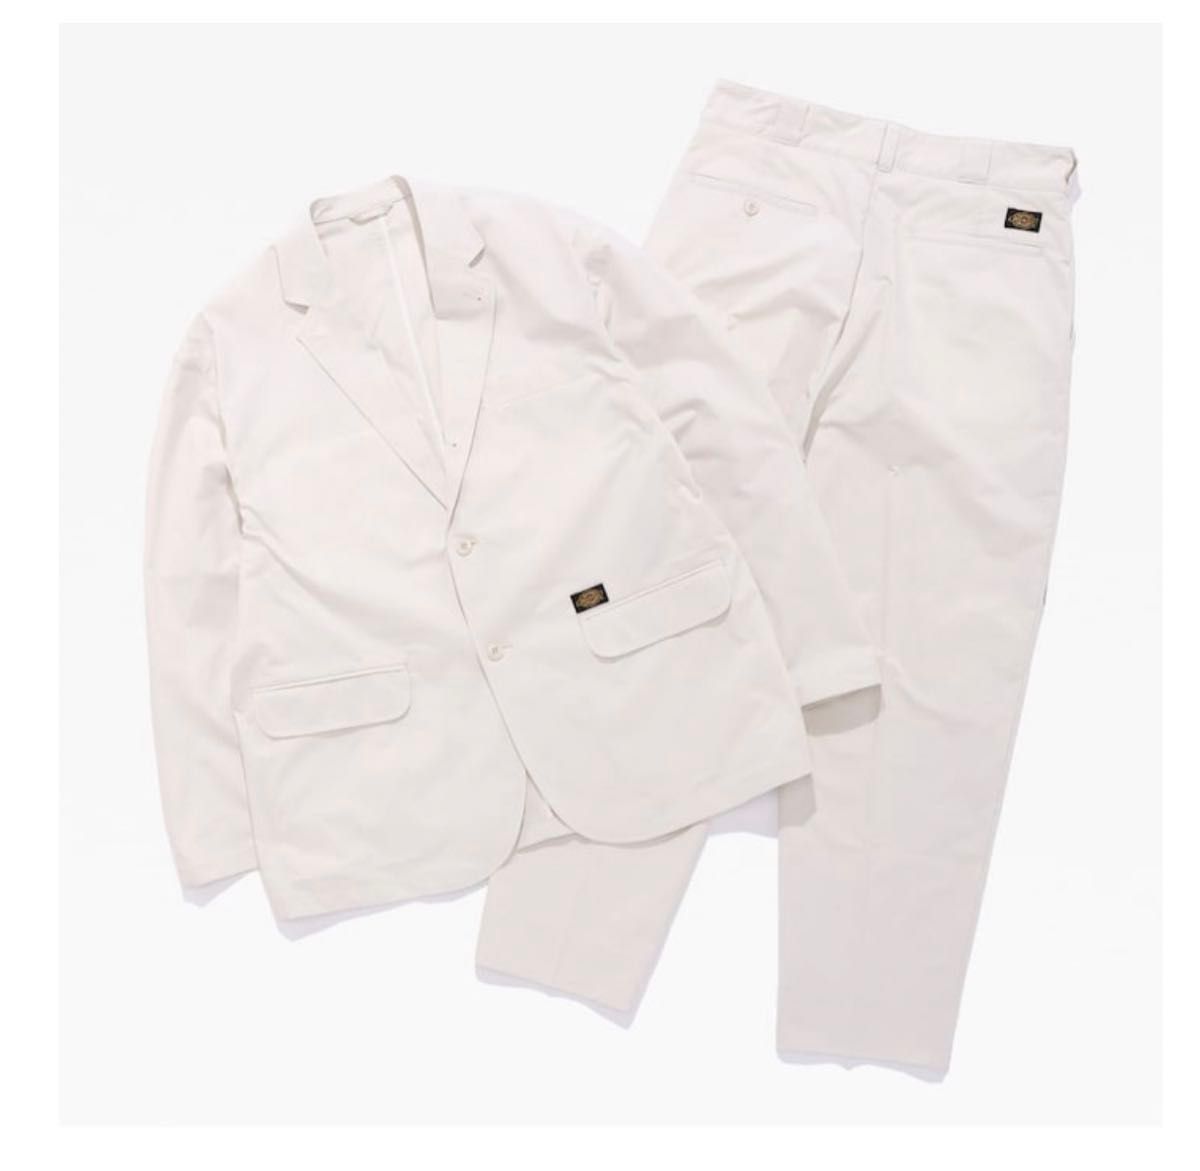 BEAMS × Dickies × TRIPSTER SUIT OFF WHITE 野村訓市 オフホワイト Sサイズ